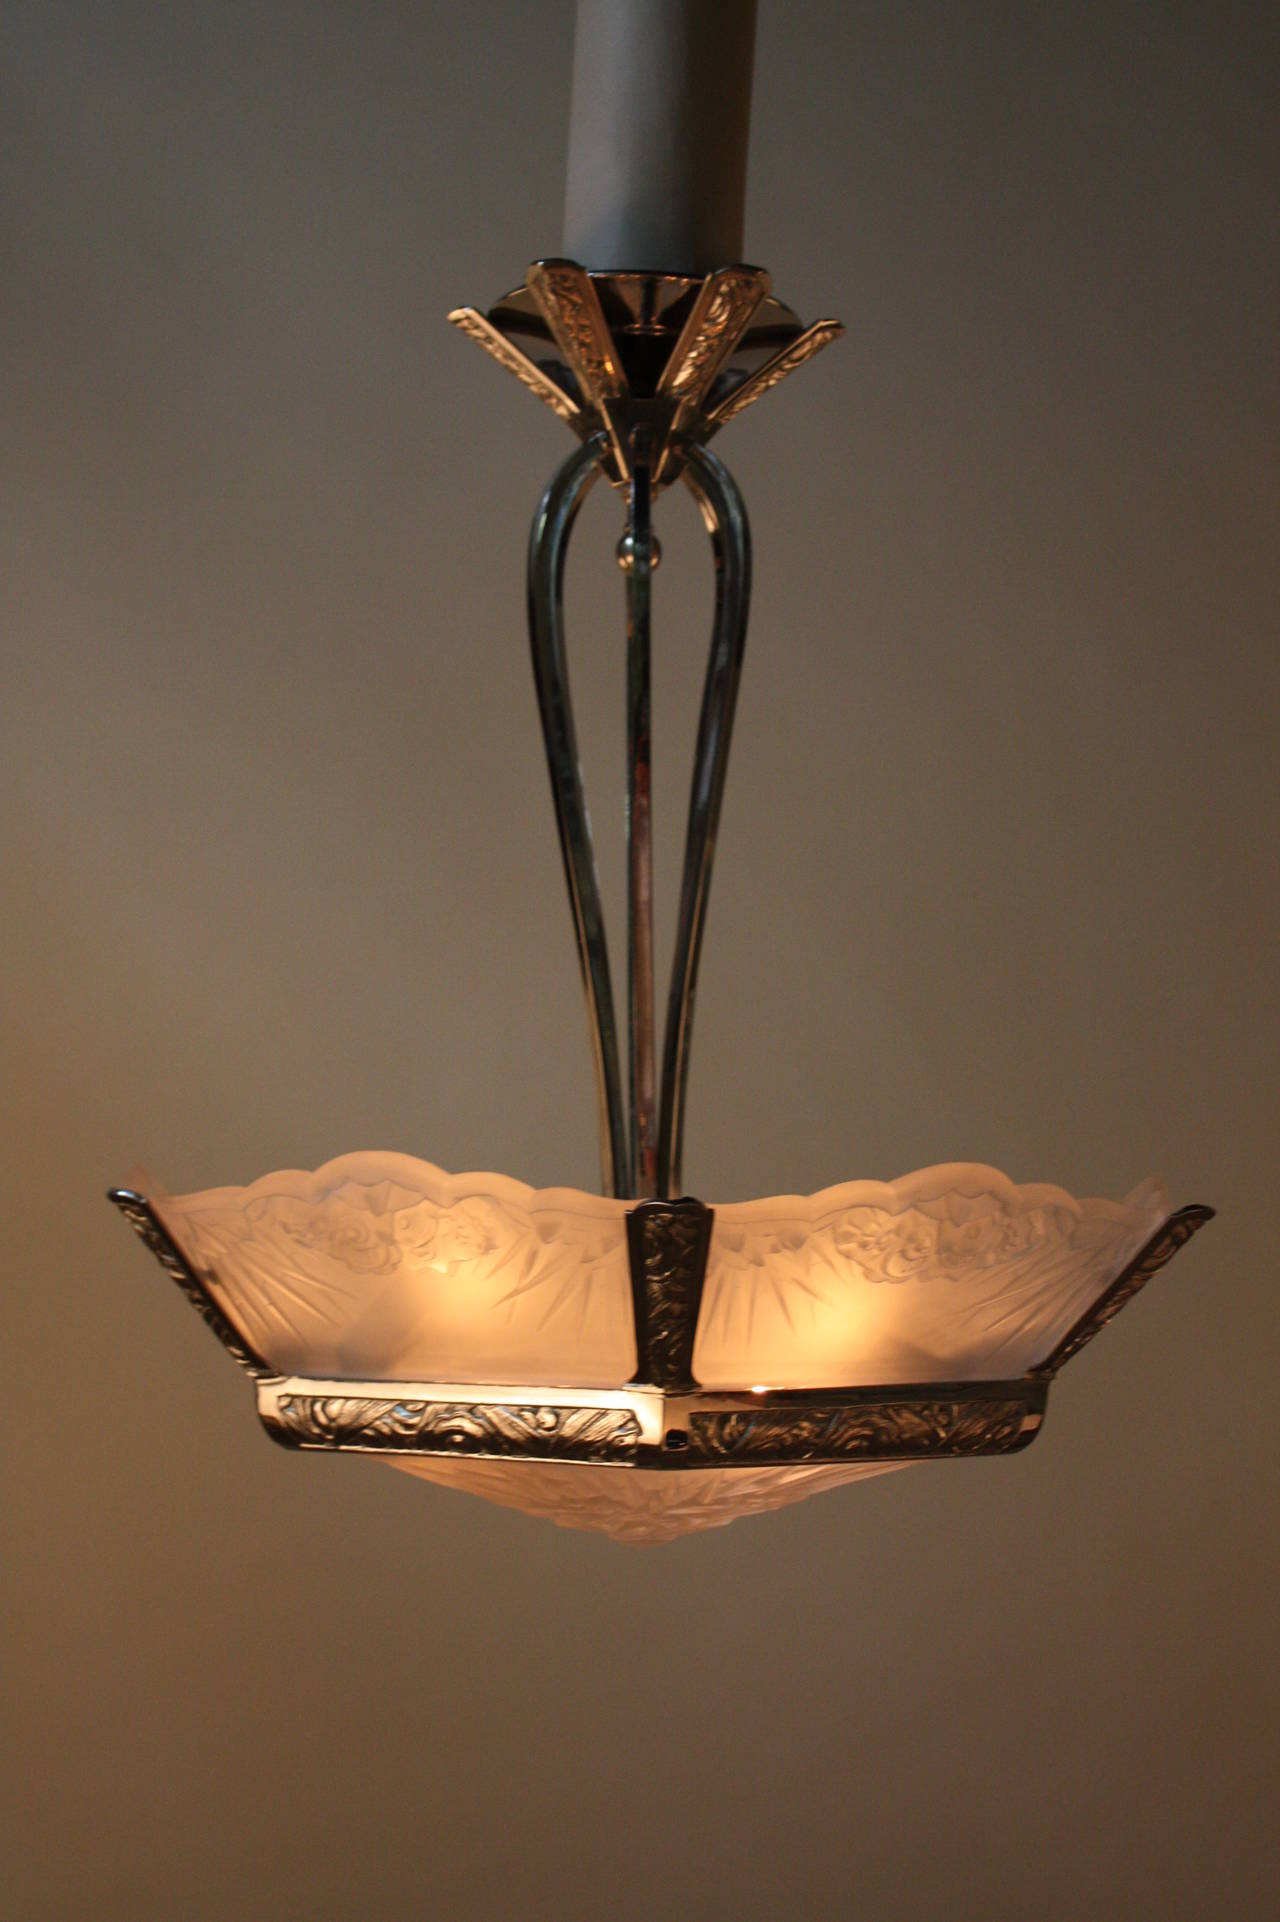 Wonderful nine light Art Deco chandelier,this chandelier is made of polished nickel on bronze with Frost glass with high light polish on the raised part of the glass.